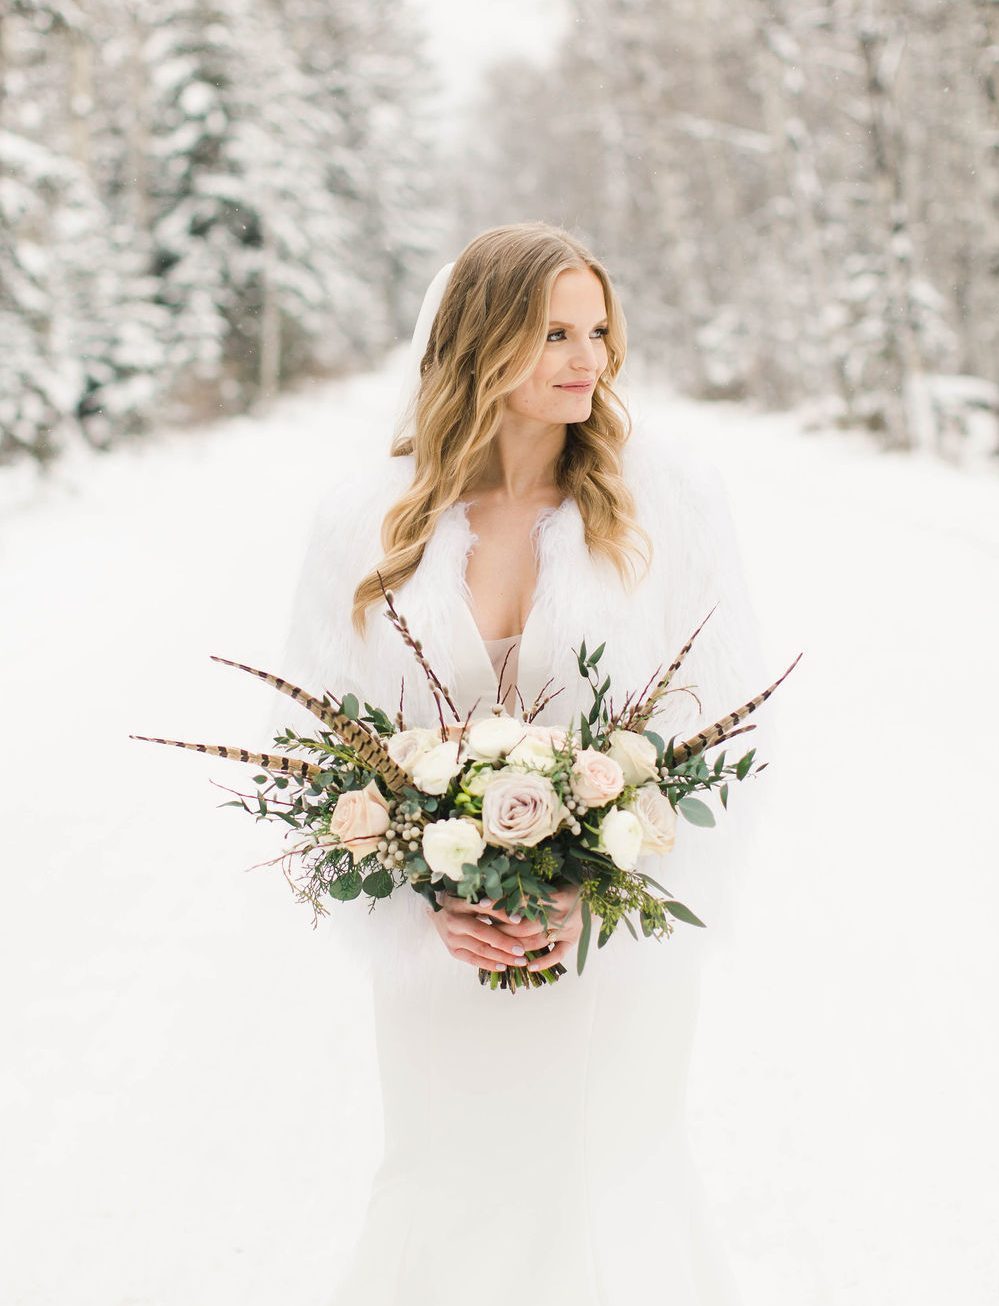 Bridal Bouquet Inspiration for Winter: 18 of the Prettiest Bouquets For  Every Winter Wedding Style – Brontë Bride